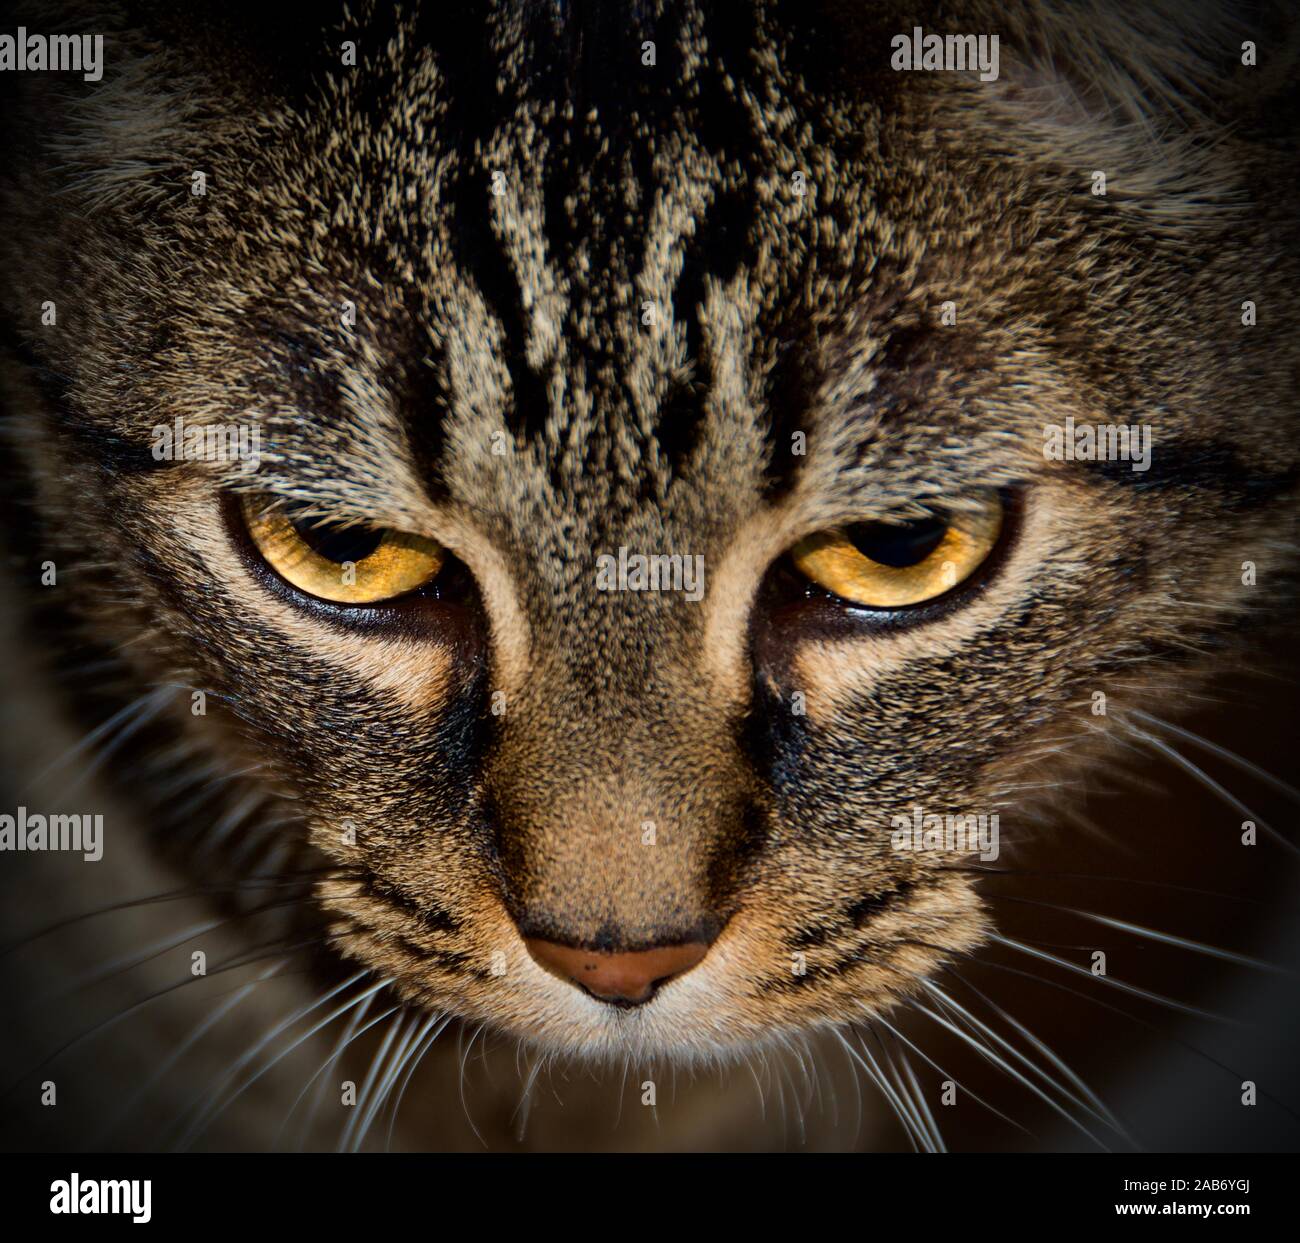 Oliver the cat with a mean glare. Stock Photo